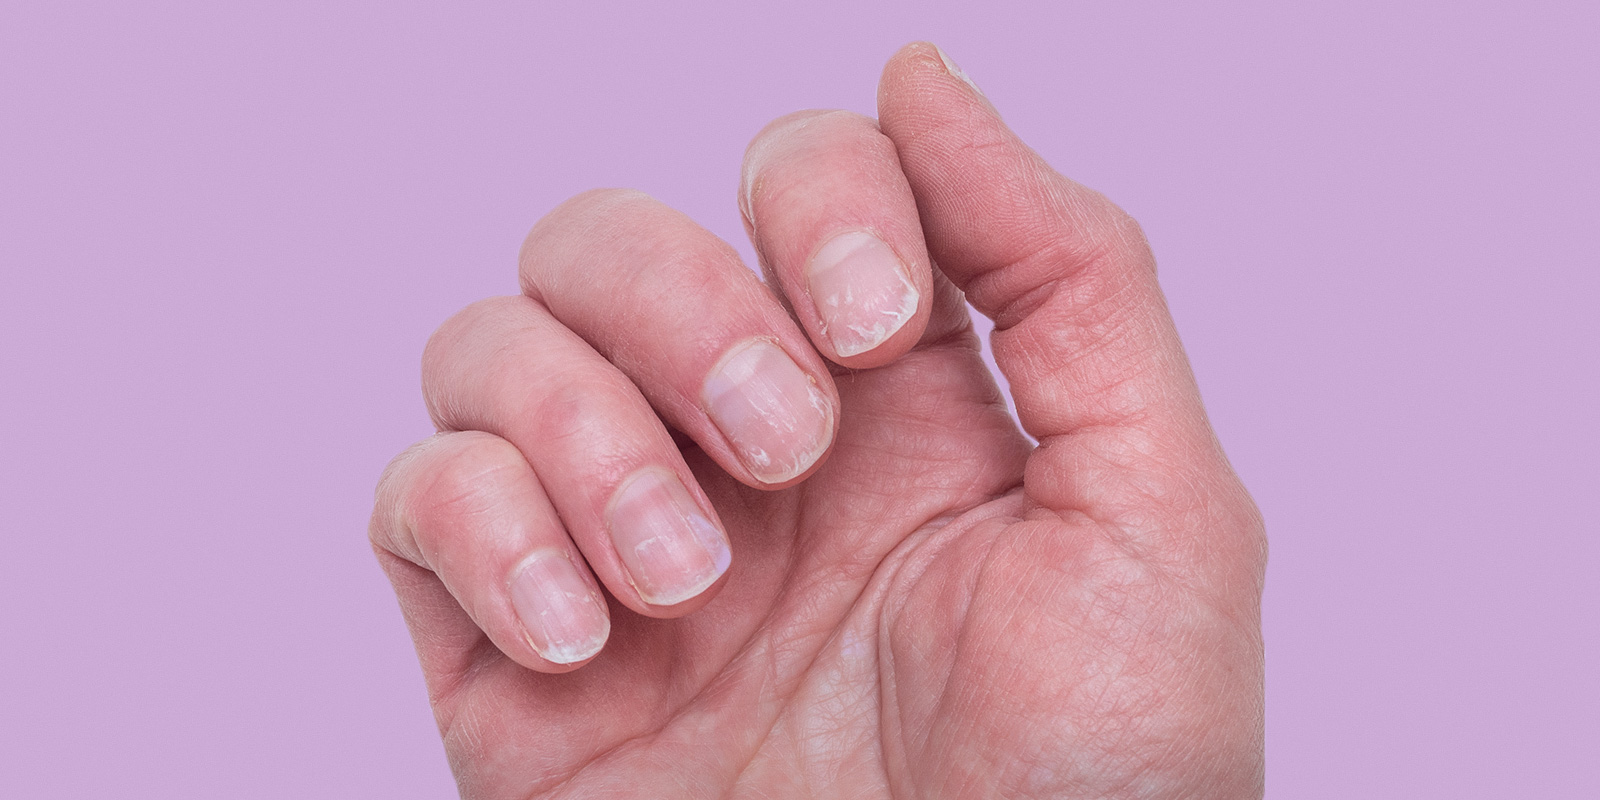 Brittle Nails: Causes and Ways to Prevent This Common Problem